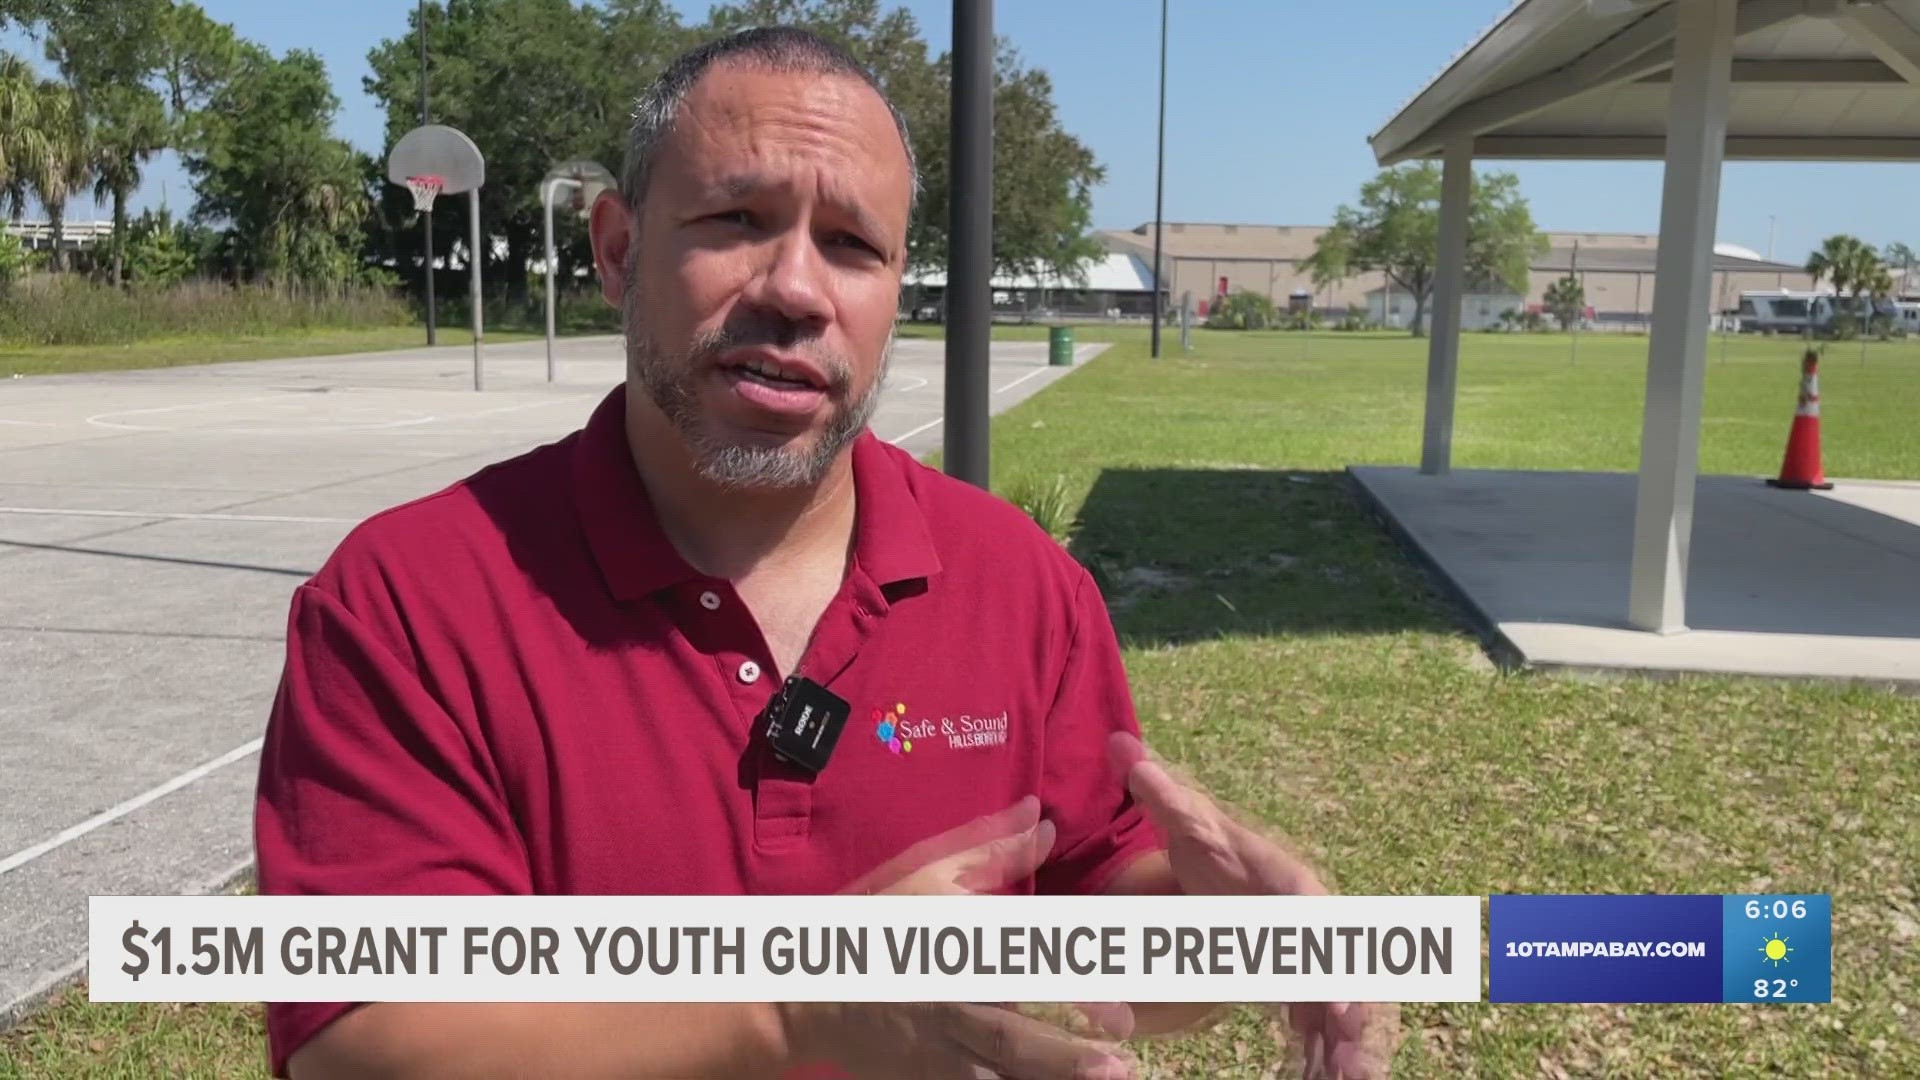 TPD will begin distributing the funding to local organizations on the frontlines of working to stop youth gun violence.